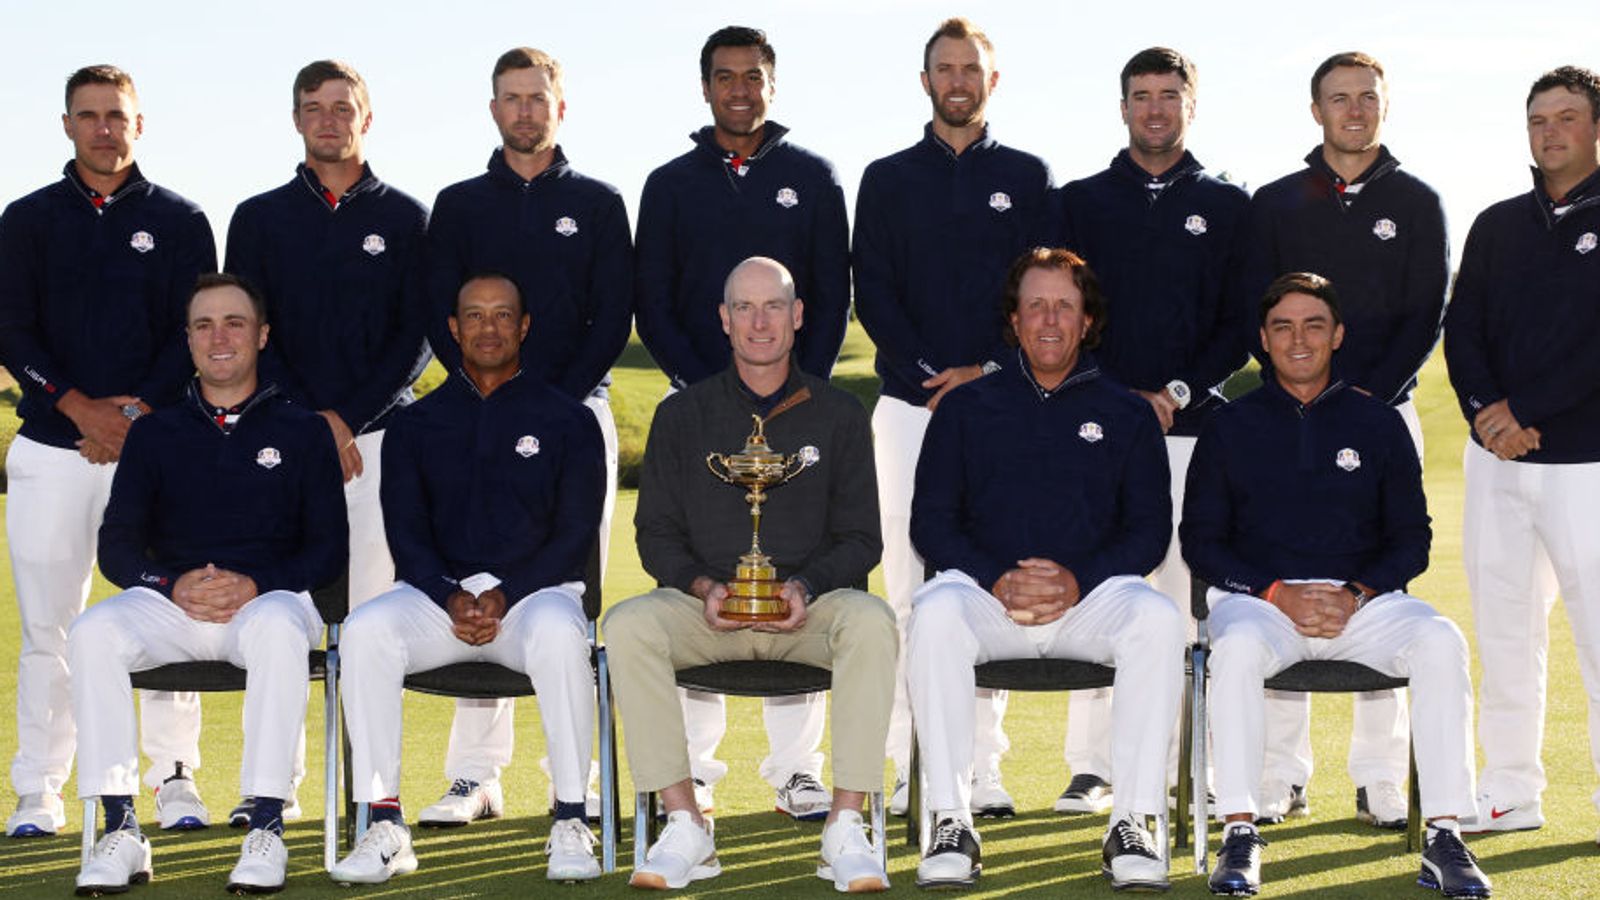 Ryder Cup Steve Stricker to have six captain's picks for Team USA